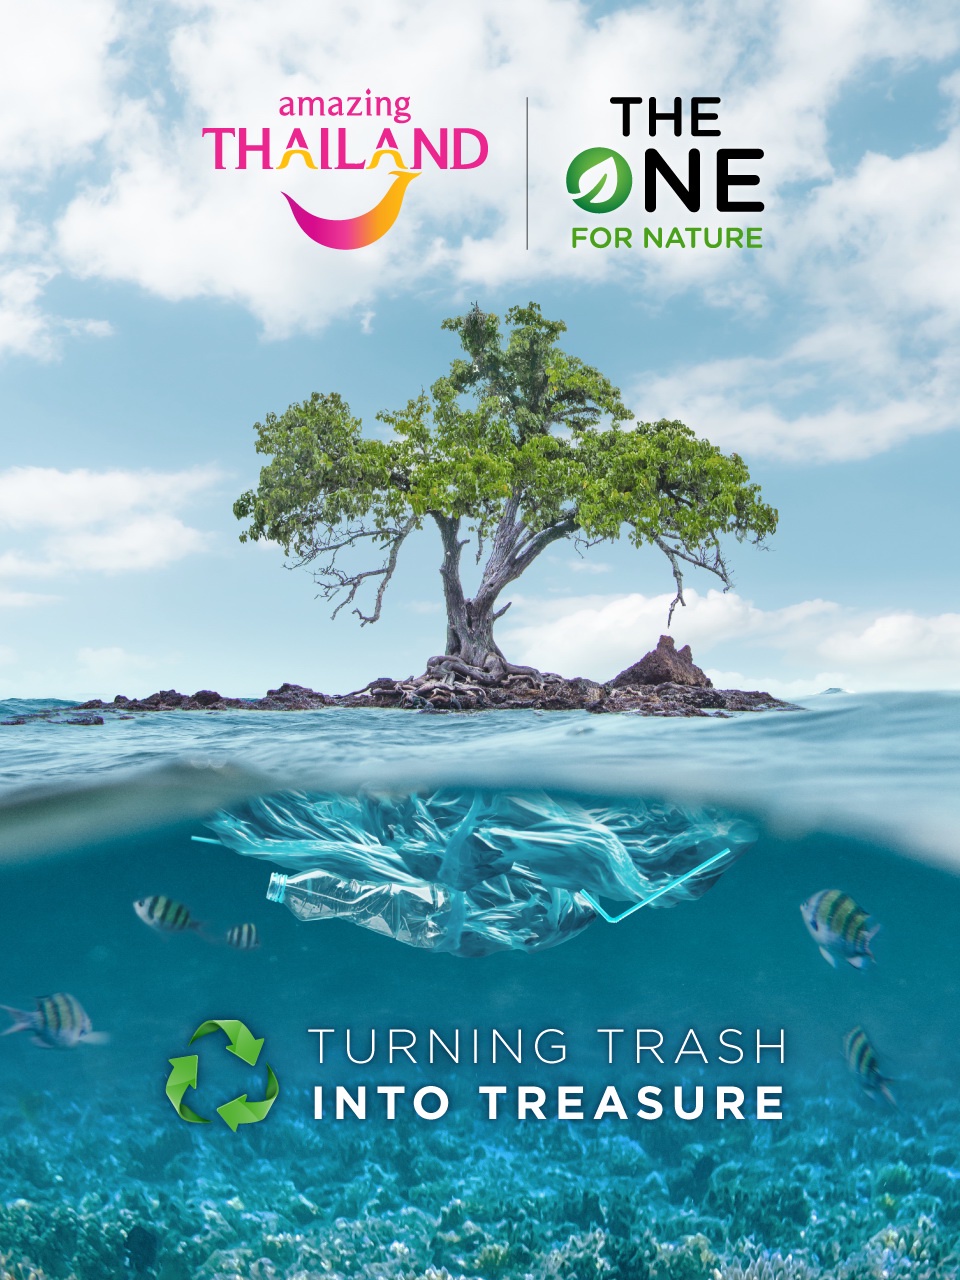 TAT unveils The 2nd The One for Nature Project to promote responsible tourism in Thailand